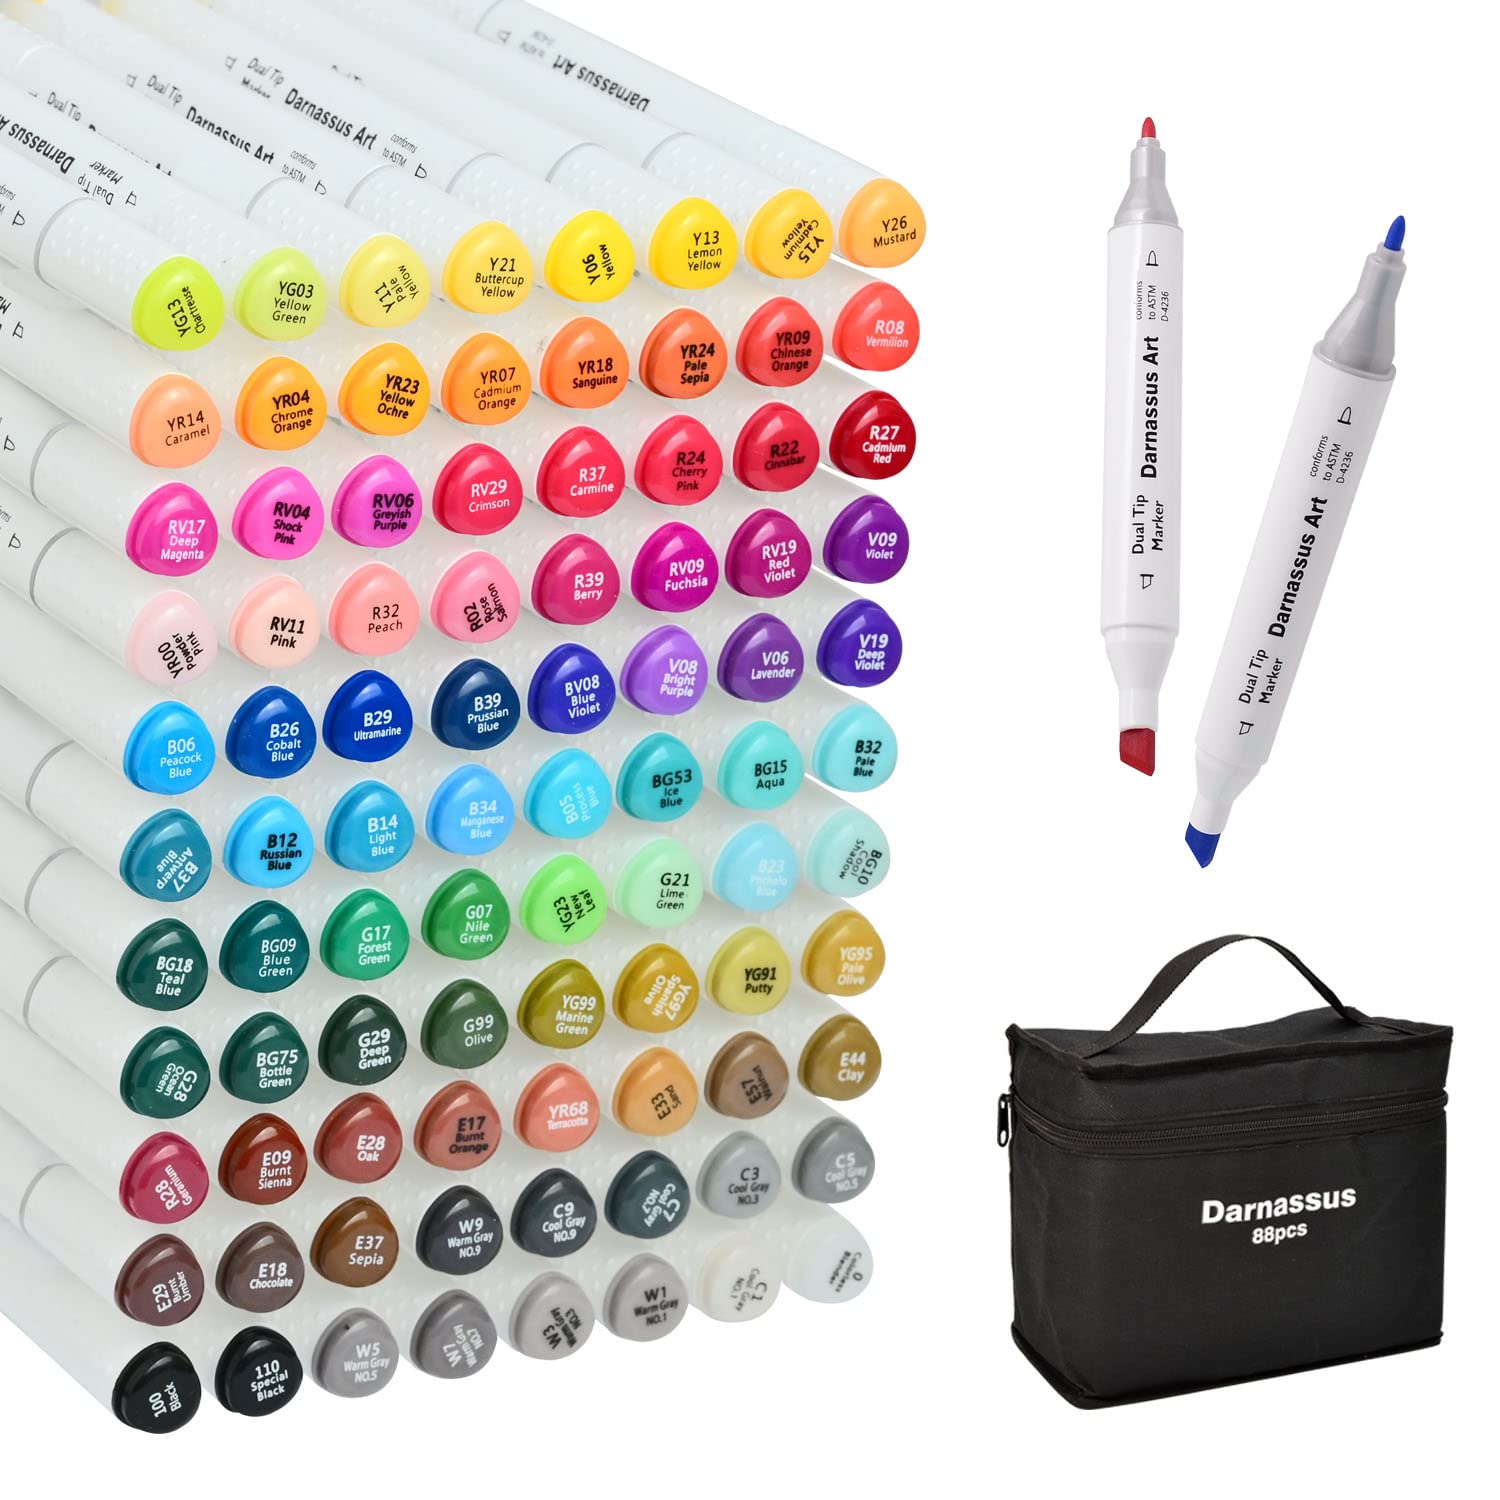 Caliart 100 Colors Artist Alcohol Based Markers Dual Tip Art